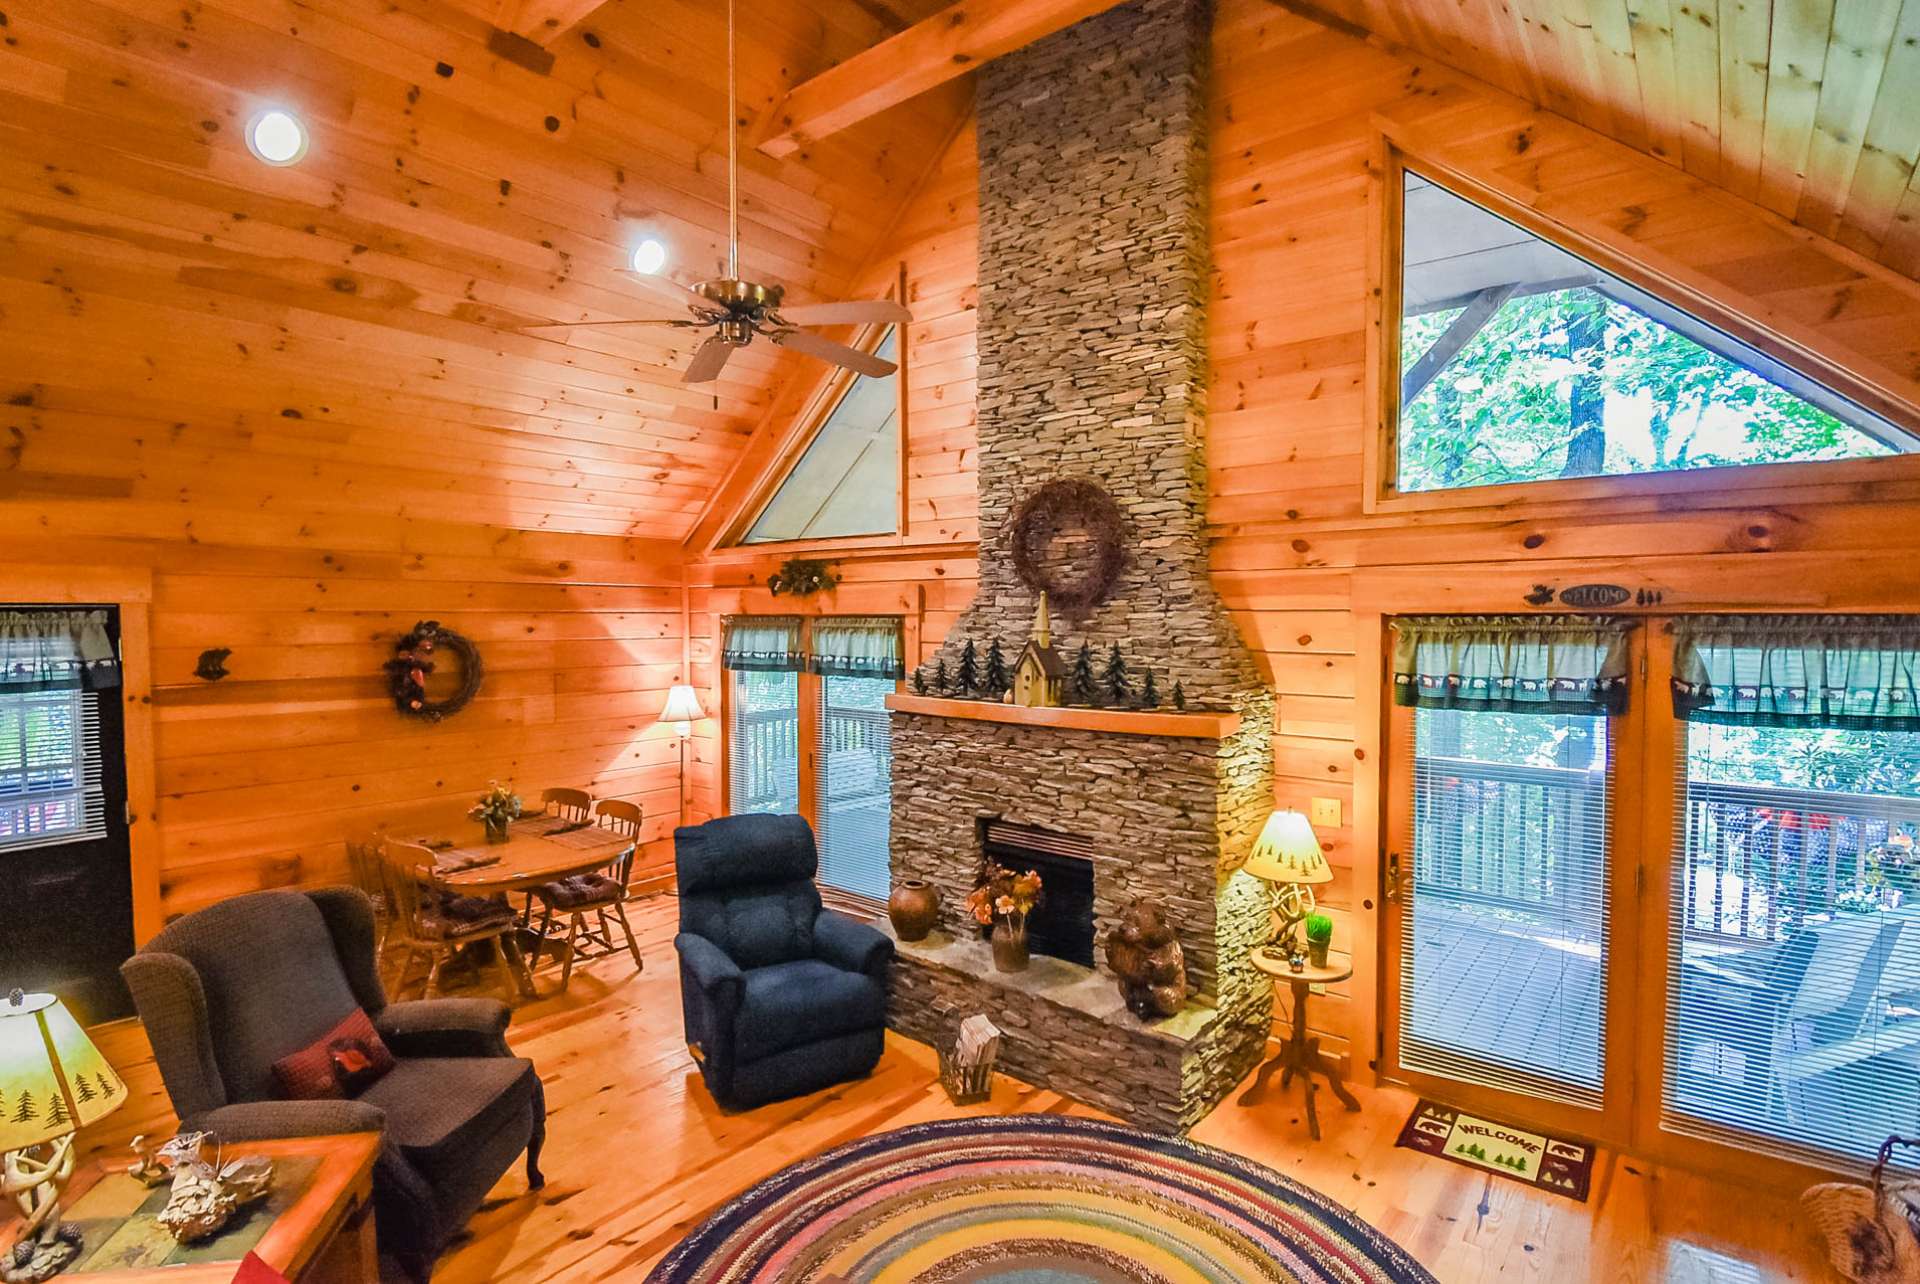 A wall of windows in the great room fills the cabin with natural light and allows you to enjoy the outdoor scenery throughout all four seasons here in the mountains.